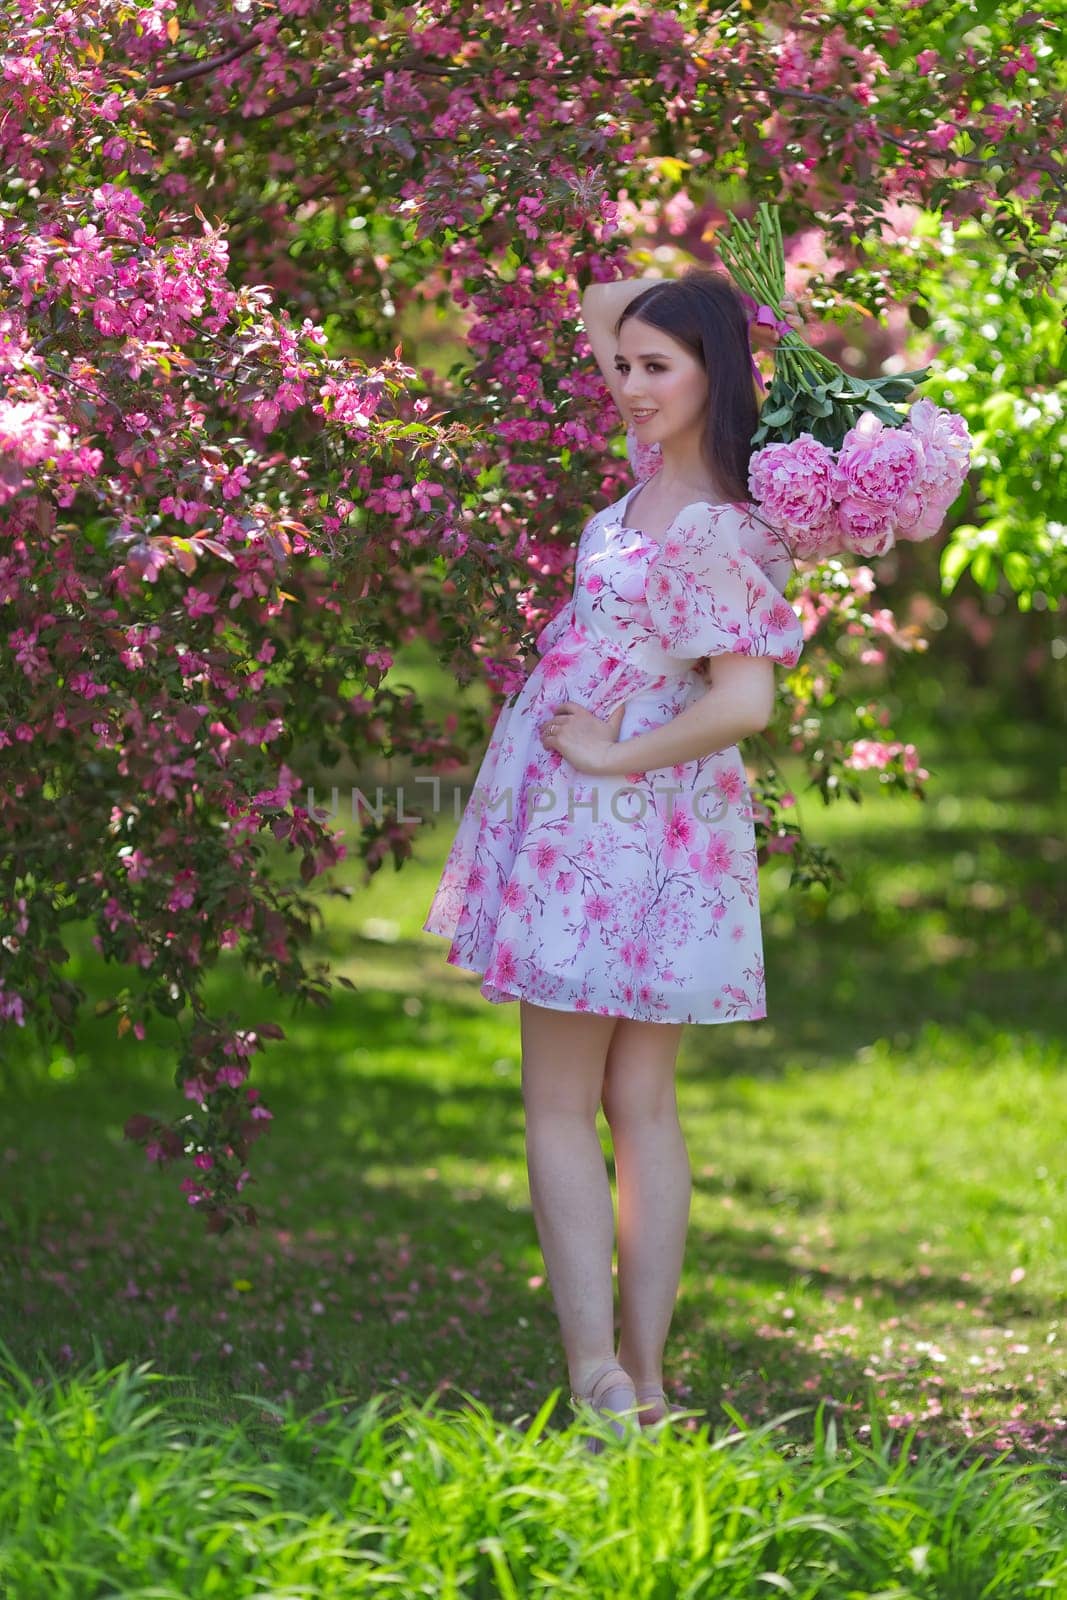 A beautiful happy girl with long hair, a brunette, in a light pink dress, holding a bouquet of large pink peonies behind her back, standing near pink flowering apple trees, in the garden on a sunny day in spring. Vertical